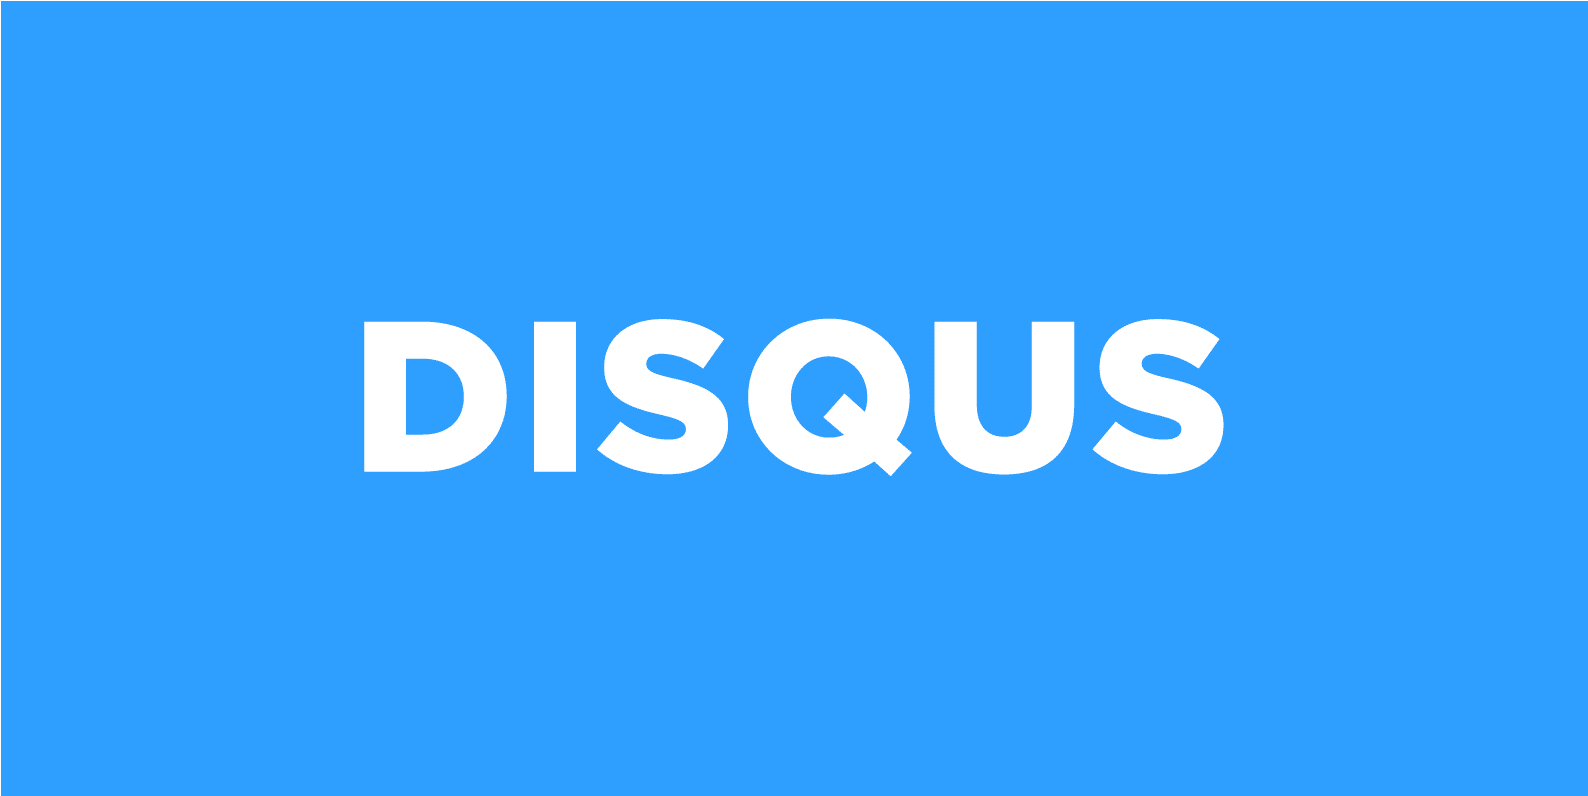 Learn how to export your Isso comments to Disqus using this simple Python script